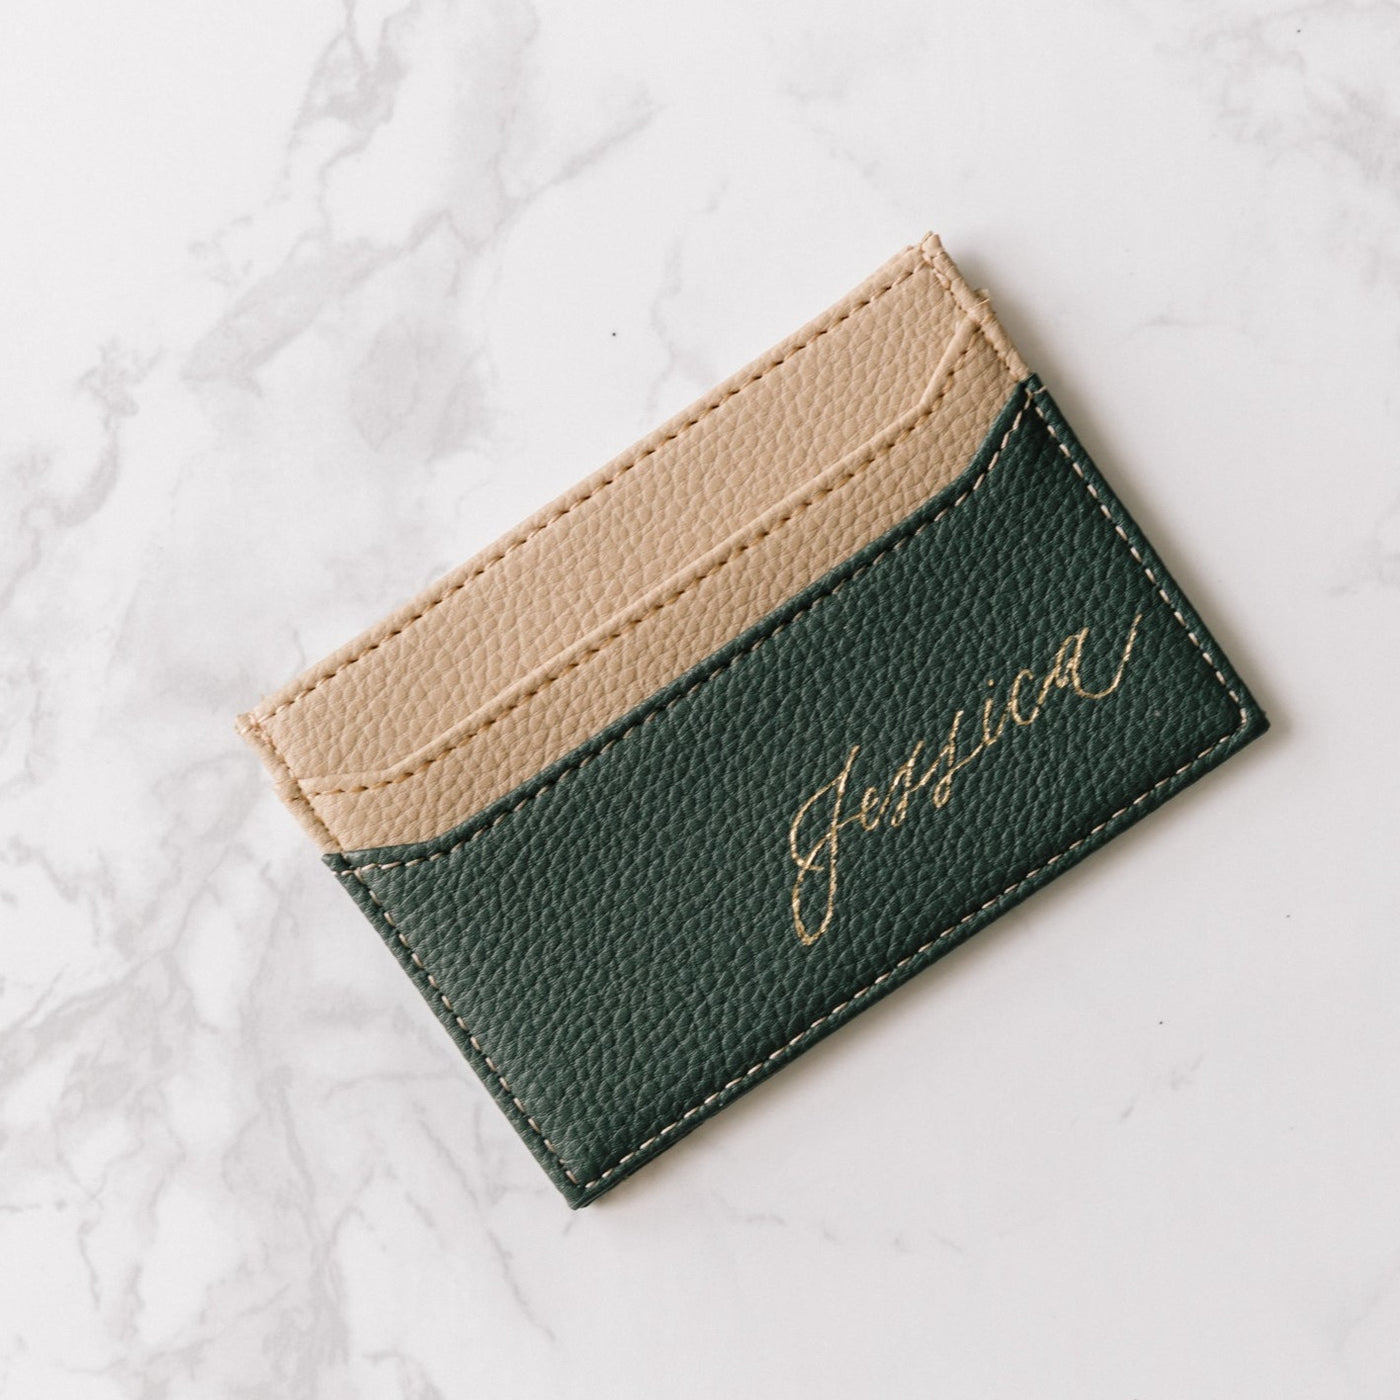 Lark and Ives / Vegan Leather Accessories / Small Accessories / Wallet / Mini Wallet / Card Case / Card Holder / Flat Card Case / Gold Foil Personalized Flat Cardholder Wallet